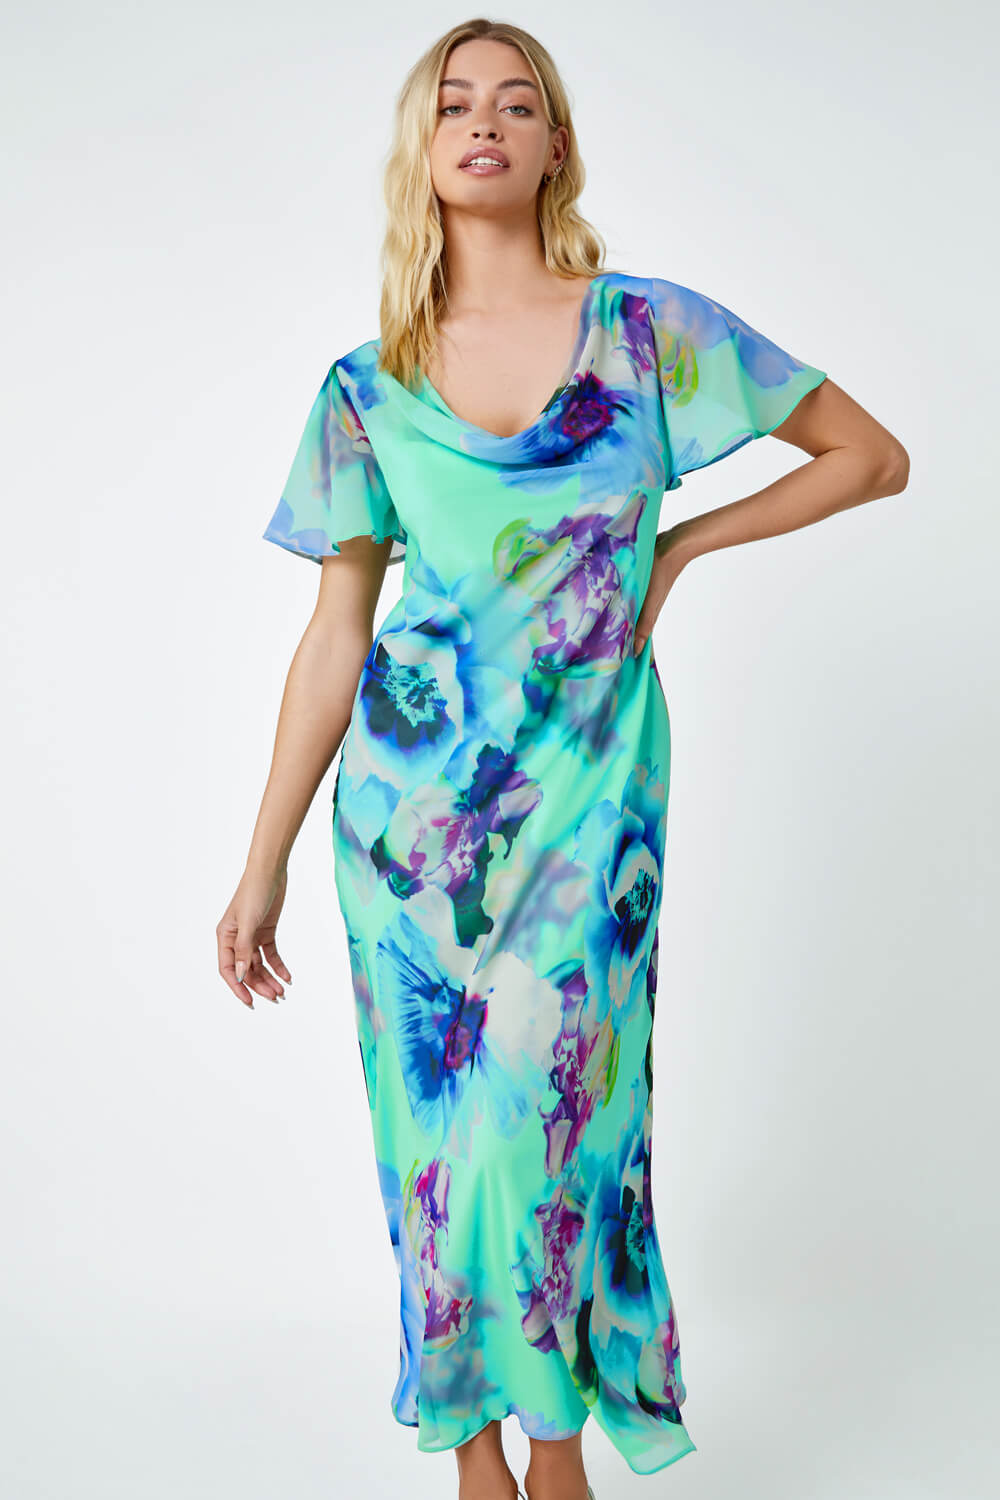 Turquoise Floral Print Cowl Neck Dress, Image 4 of 5